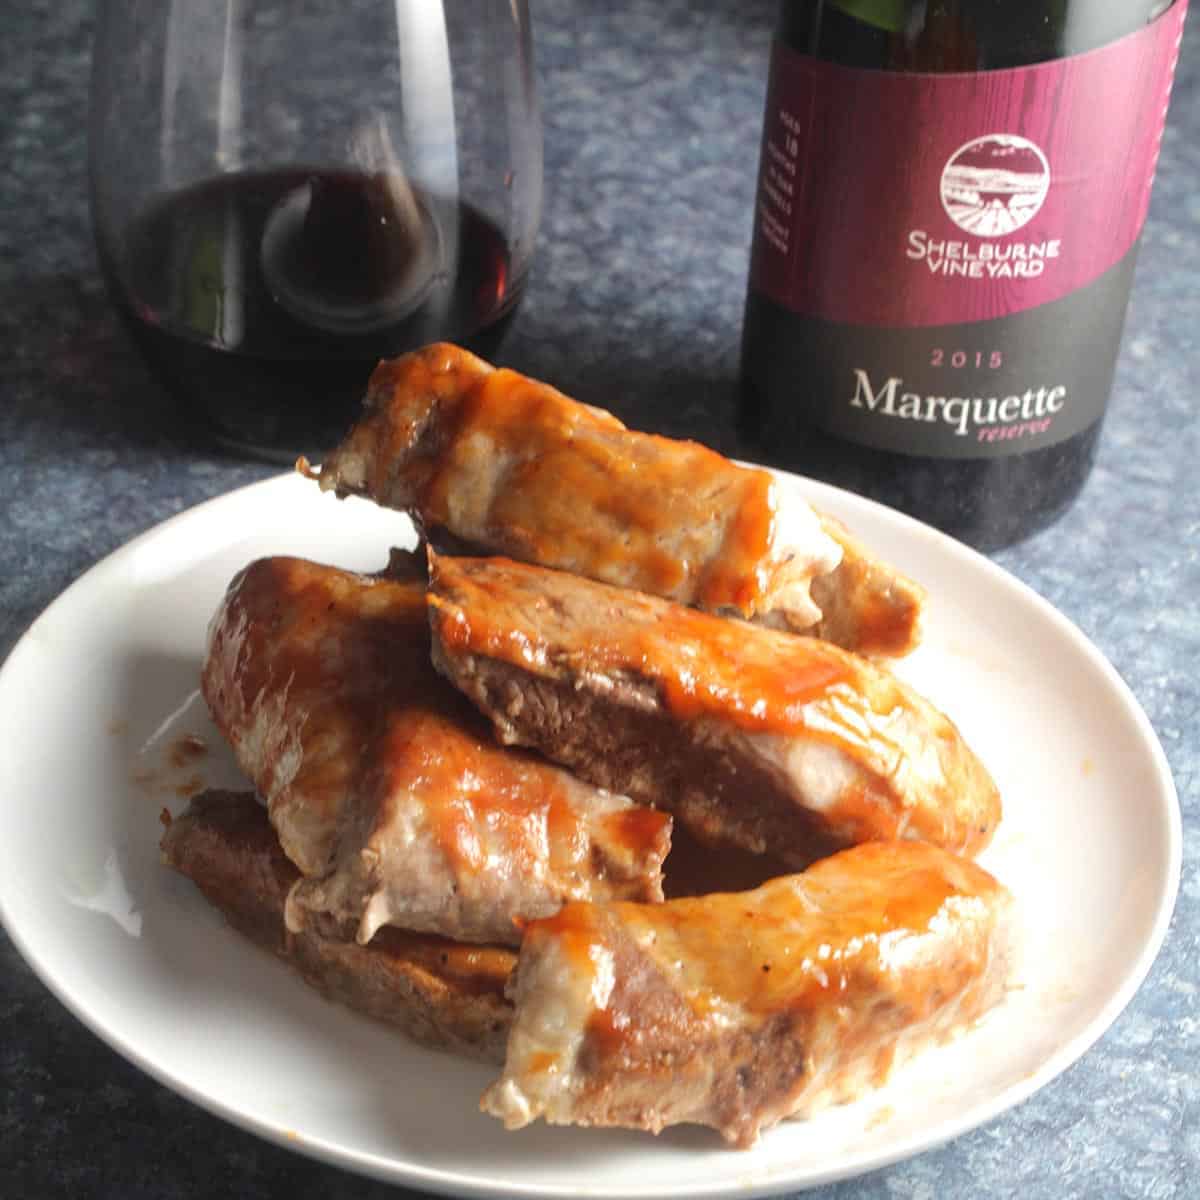 Marquette wine from Vermont served with boneless pork chops.